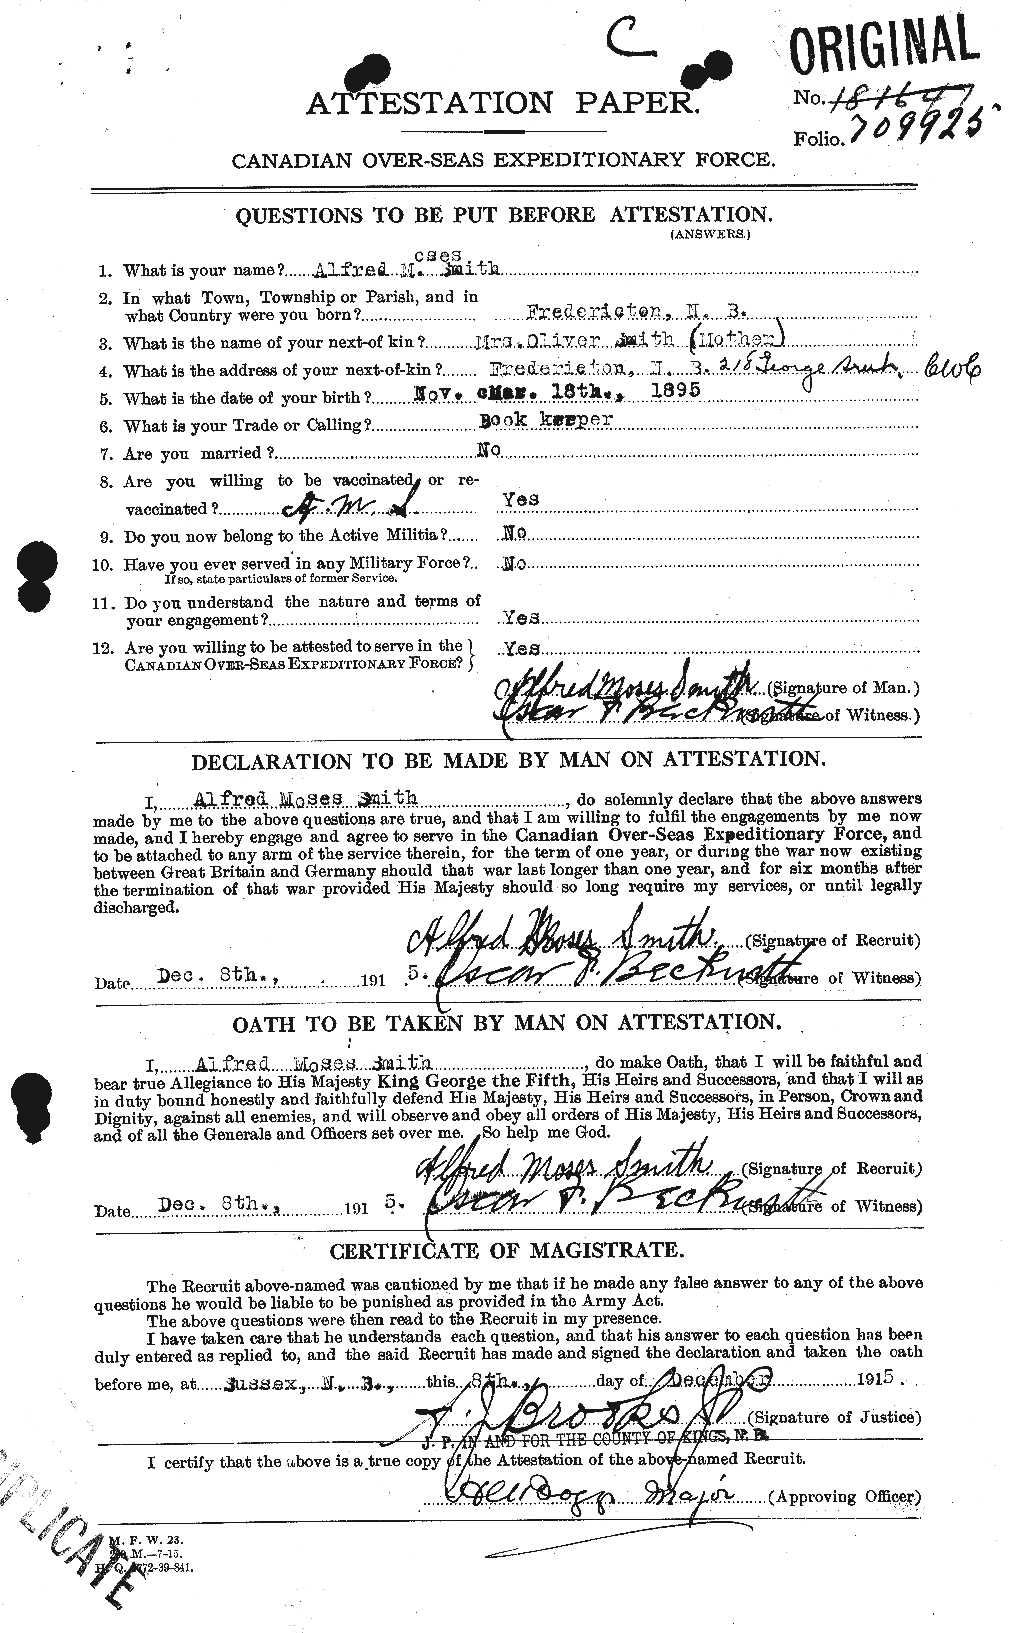 Personnel Records of the First World War - CEF 097711a